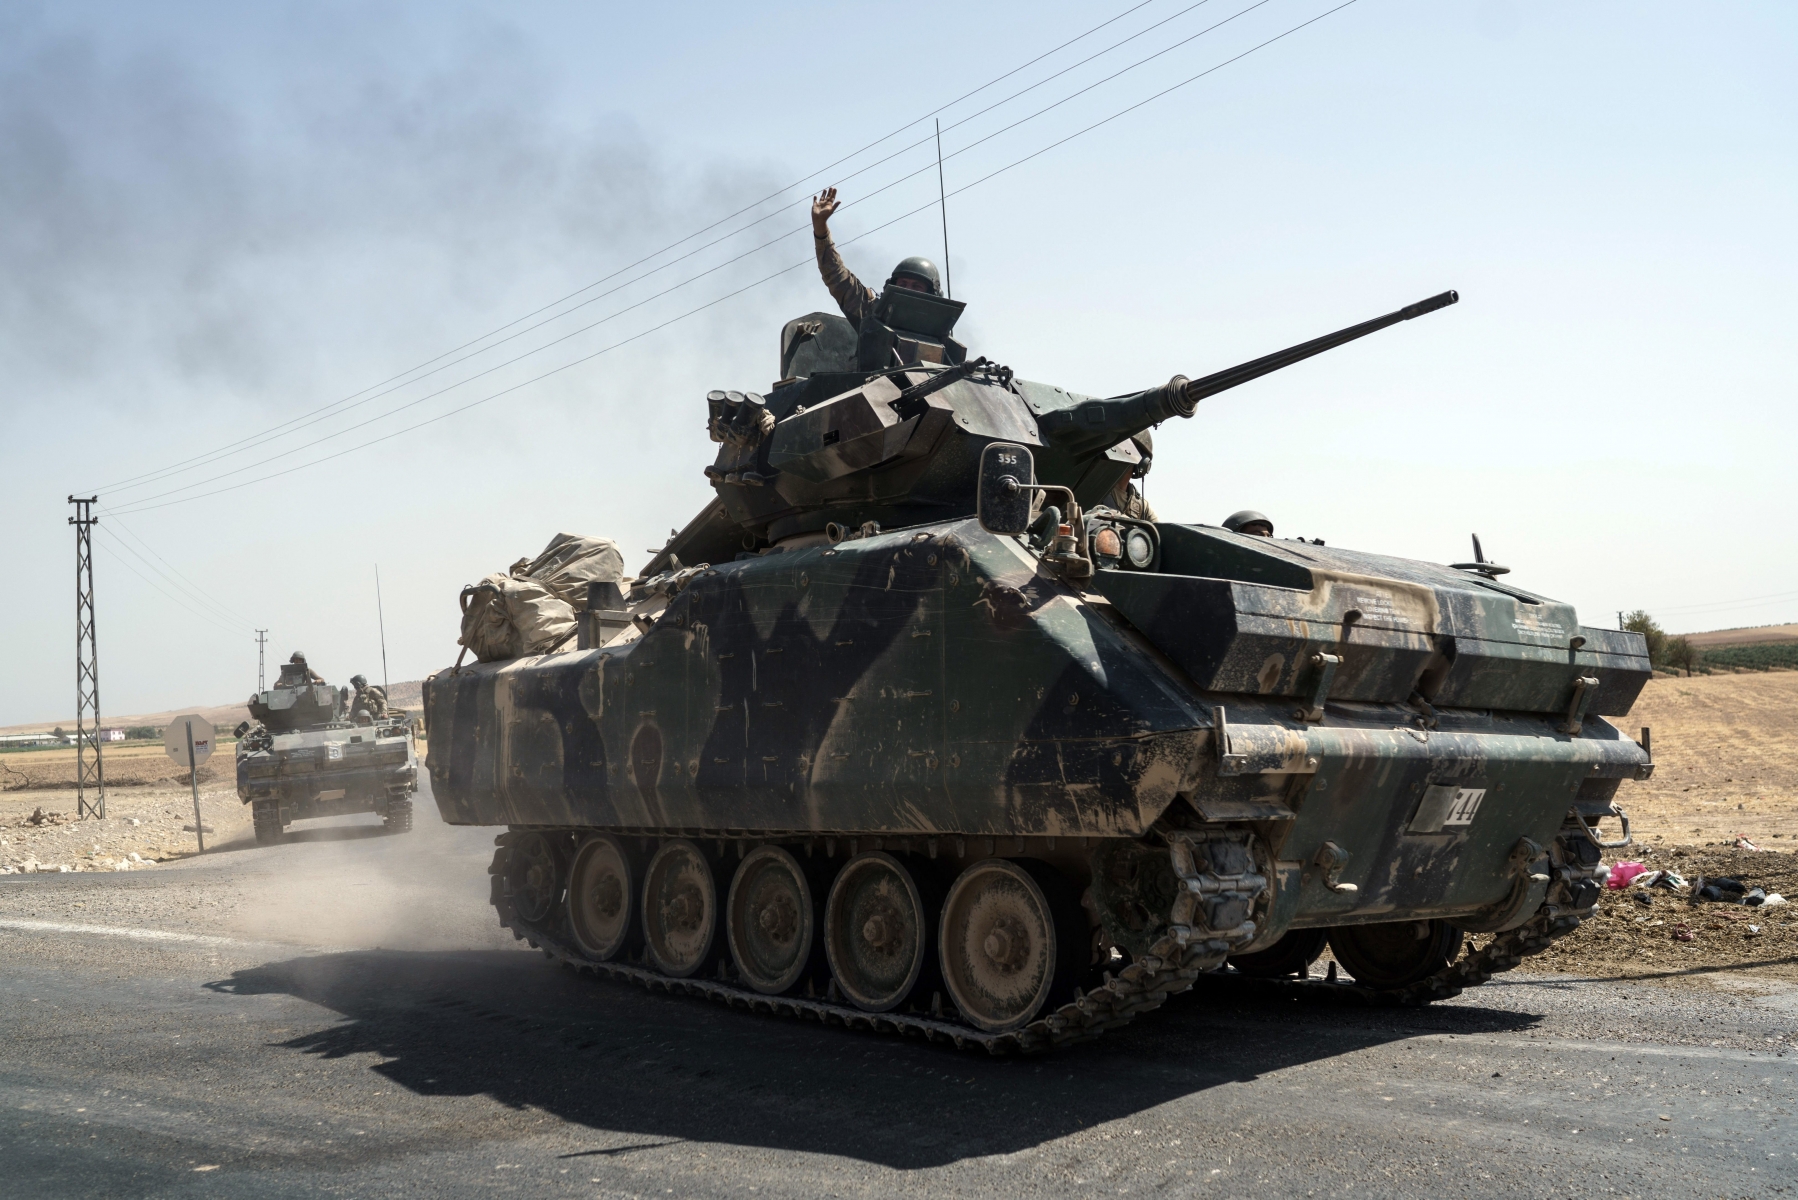 Turkish troops head to the Syrian border, in Karkamis, Turkey, Saturday, Aug. 27, 2016. Turkey on Wednesday sent tanks across the border to help Syrian rebels retake the key Islamic State-held town of Jarablus and to contain the expansion of Syria's Kurds in an area bordering Turkey. (AP Photo/Halit Onur Sandal) Turkey Syria